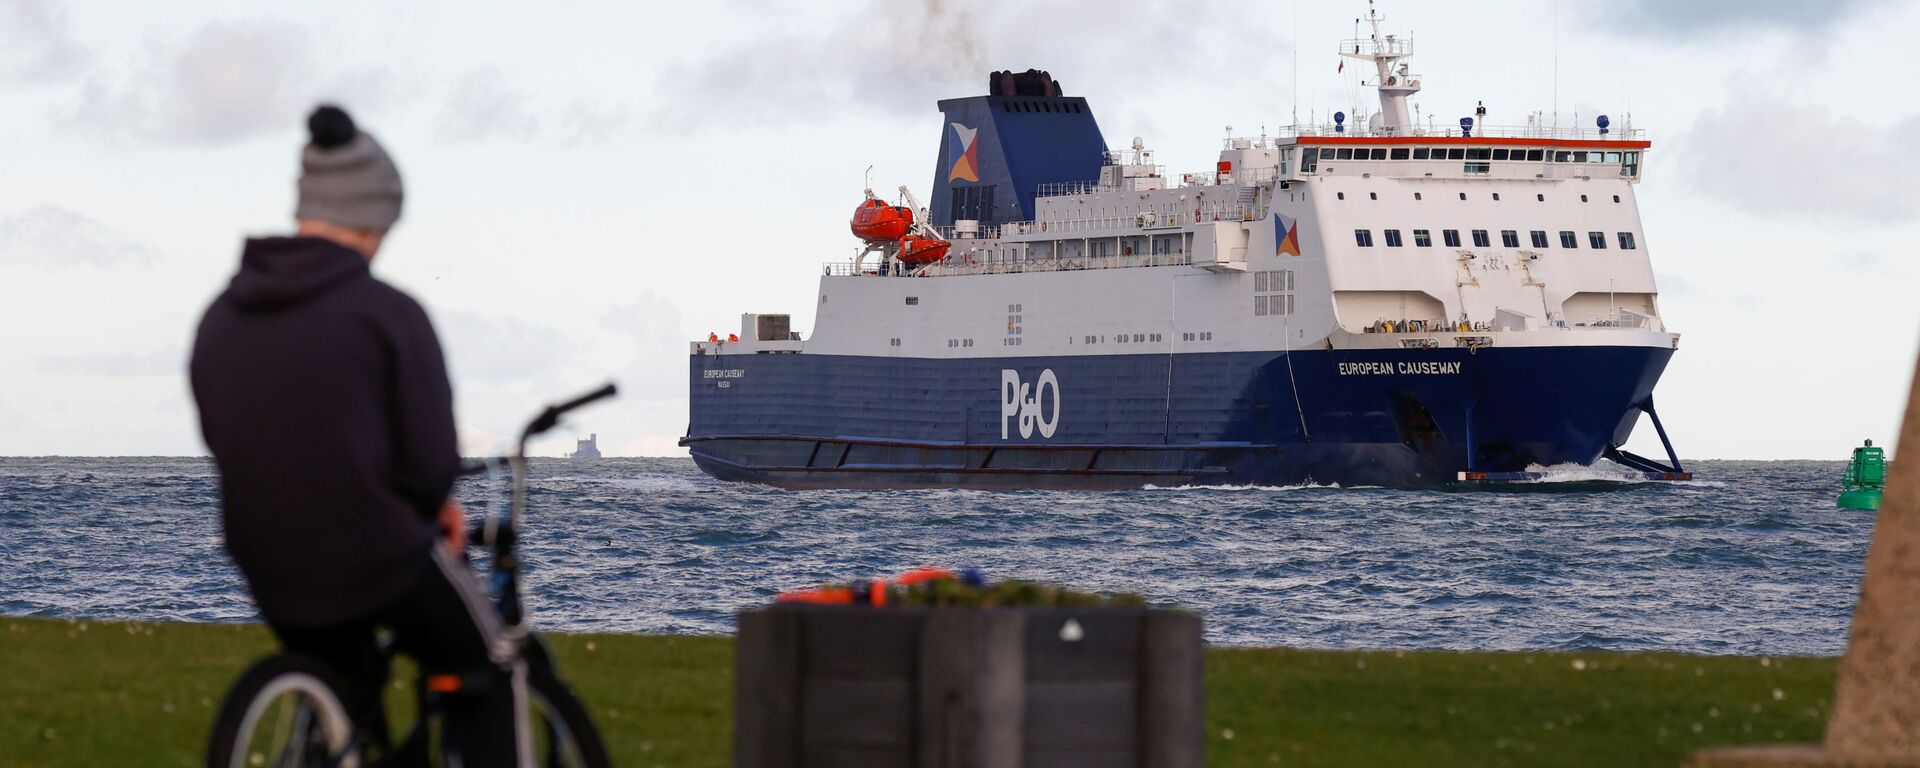 A person on a bike is seen as a ferry arrives at the Port of Larne, Northern Ireland Britain January 1, 2021 - Sputnik International, 1920, 26.01.2021